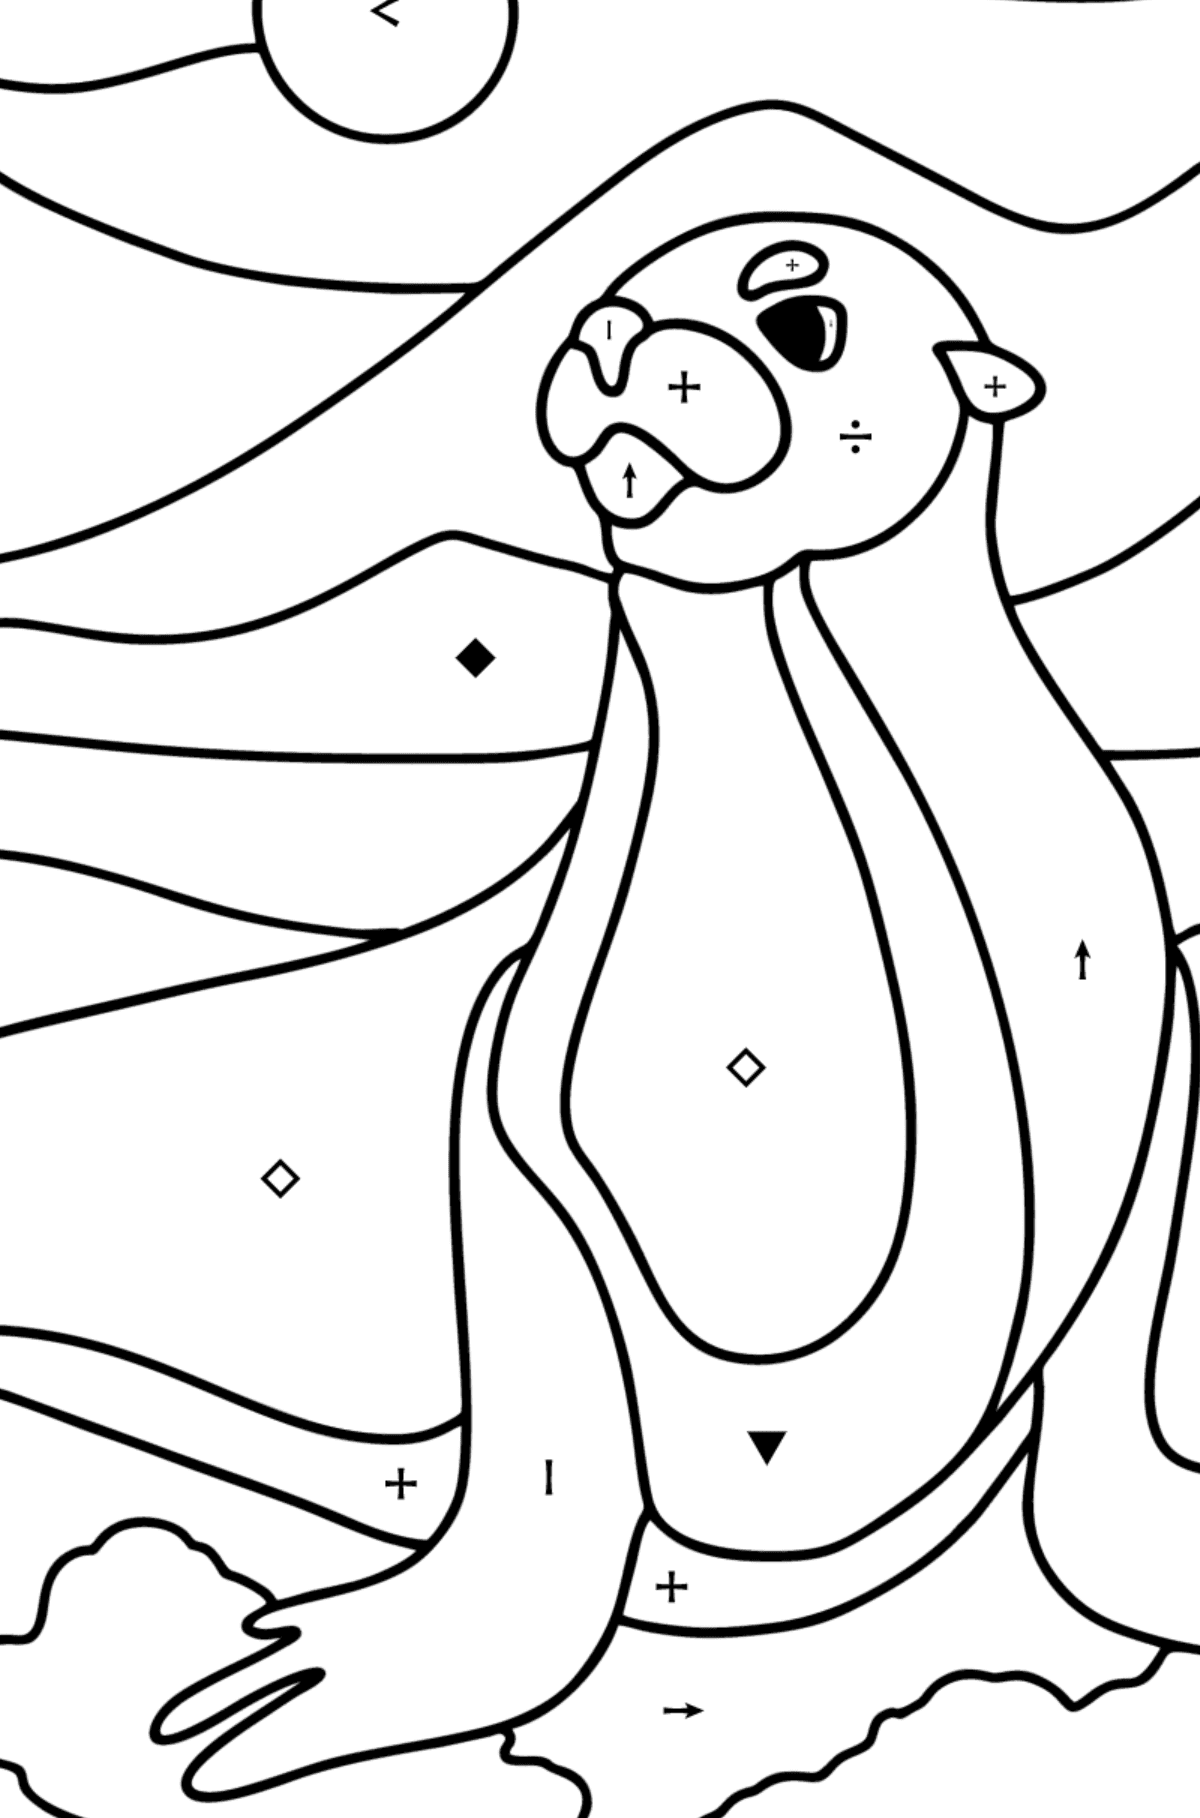 Sea lion coloring page - Coloring by Symbols for Kids